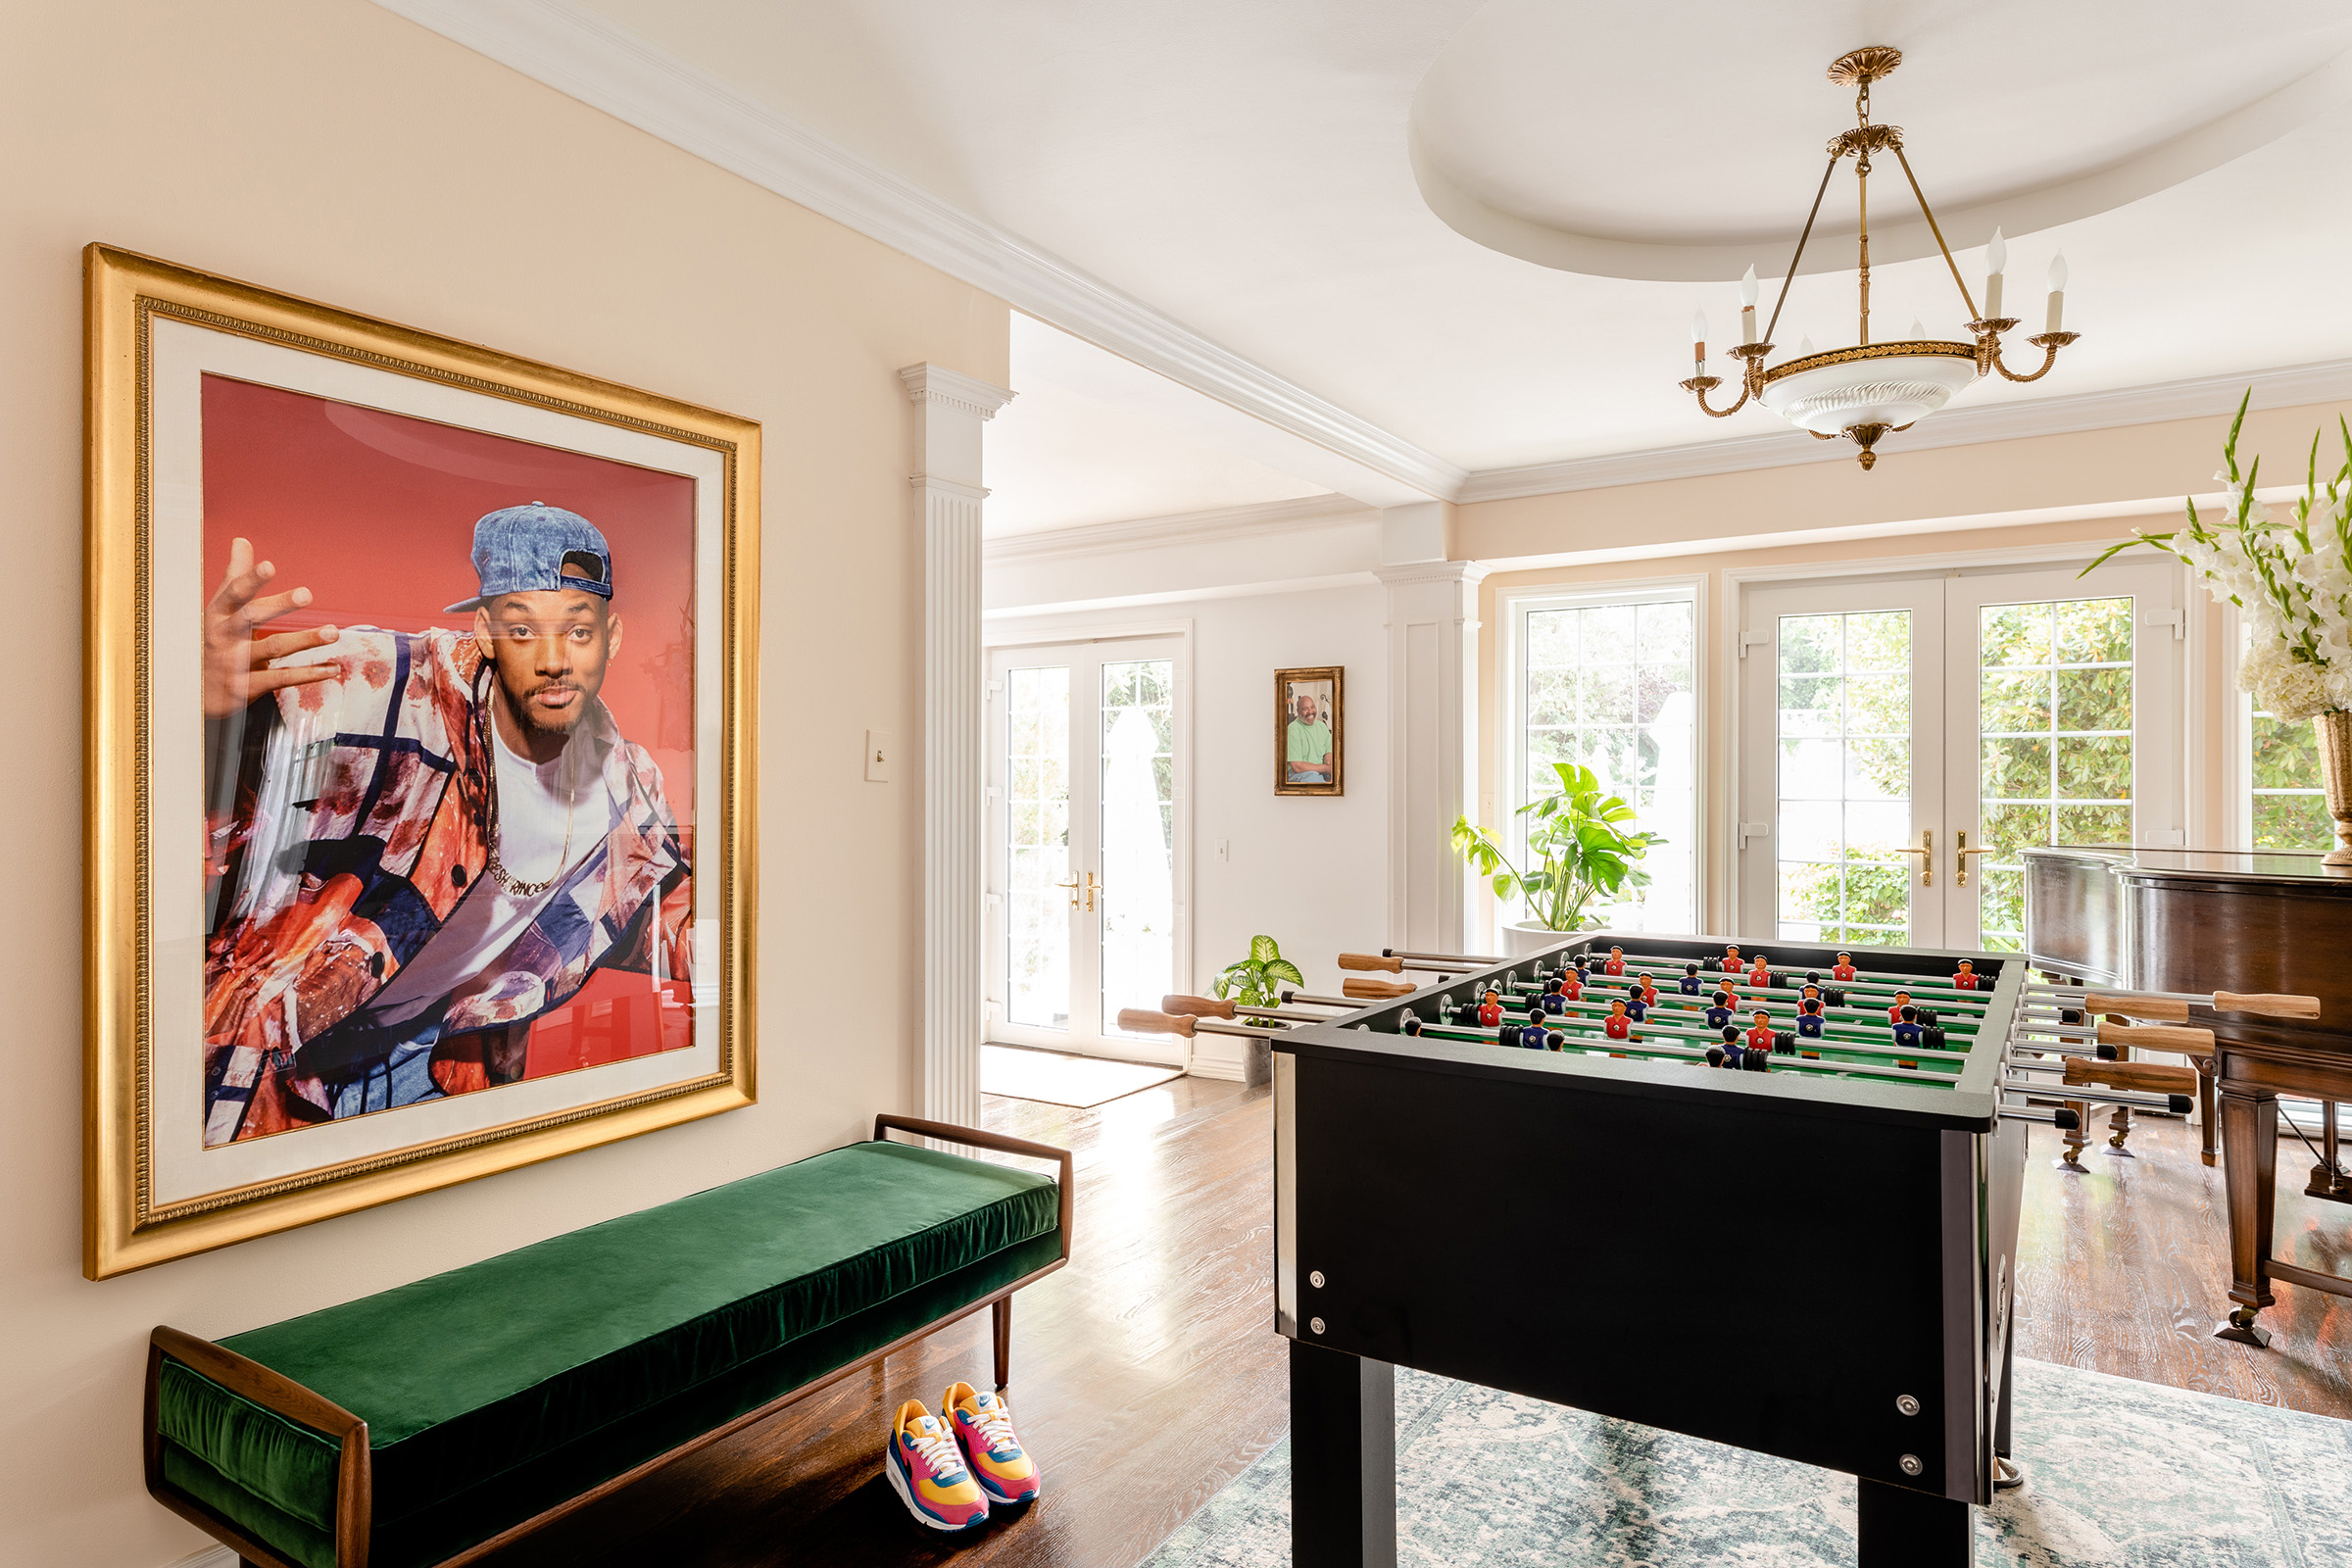 An entryway containing a foosball table and elegantly framed portrait of Will Smith.